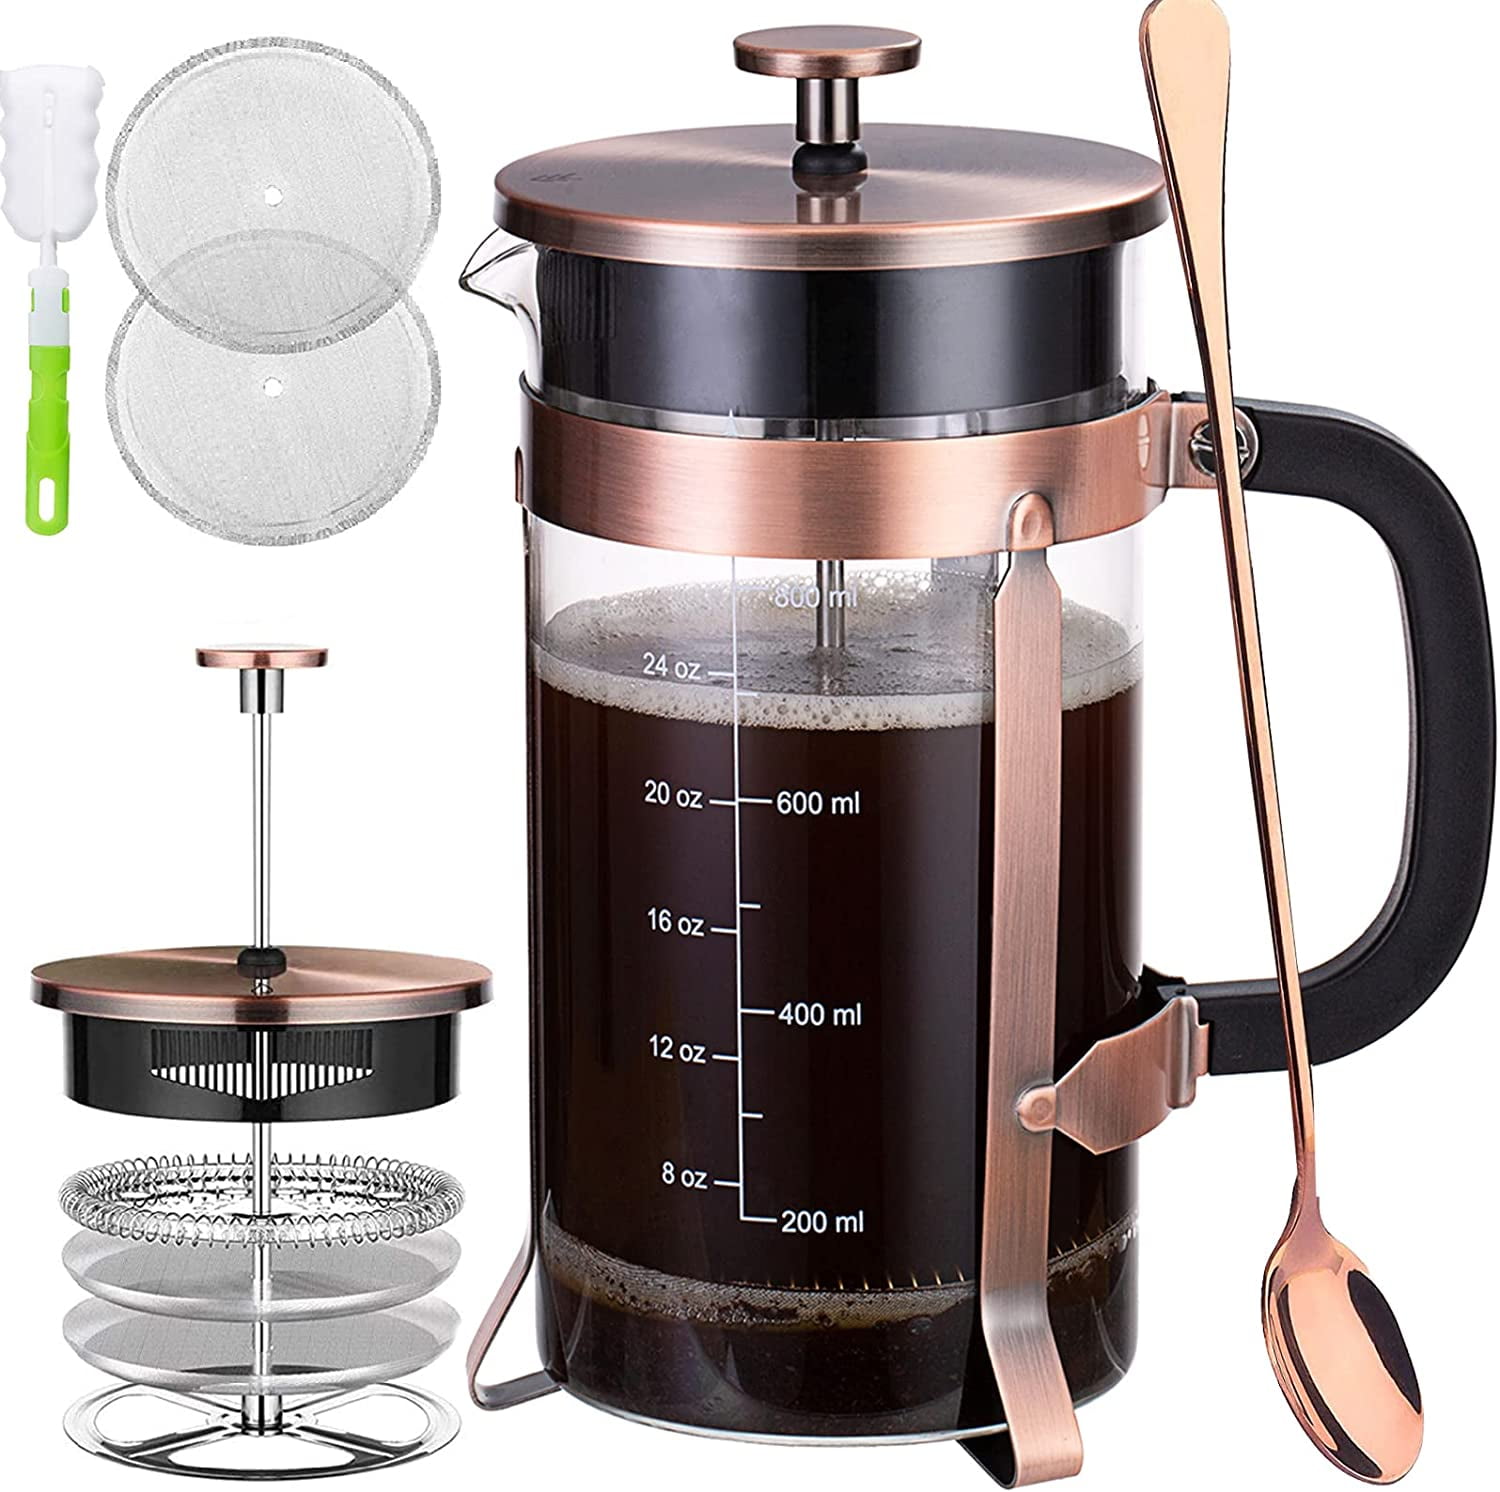  French Press Coffee Maker 34 Oz – Insulated Coffee Press  Stainless Steel 304 – Double Wall & 4 Level Filtration System (1 Liter) –  Black: Home & Kitchen